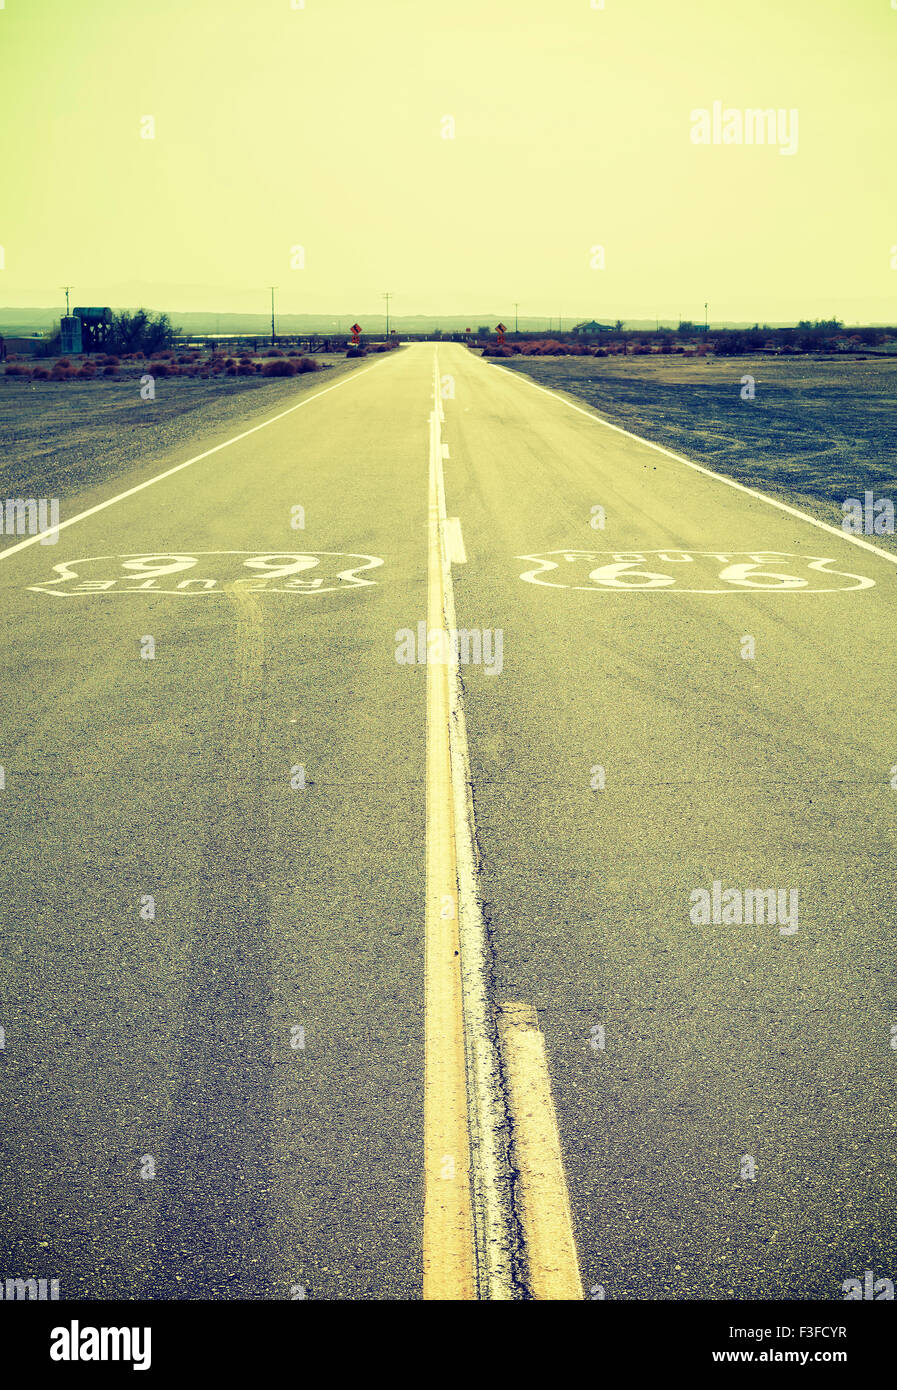 Cross processed old film style Route 66, California, USA Stock Photo - Alamy